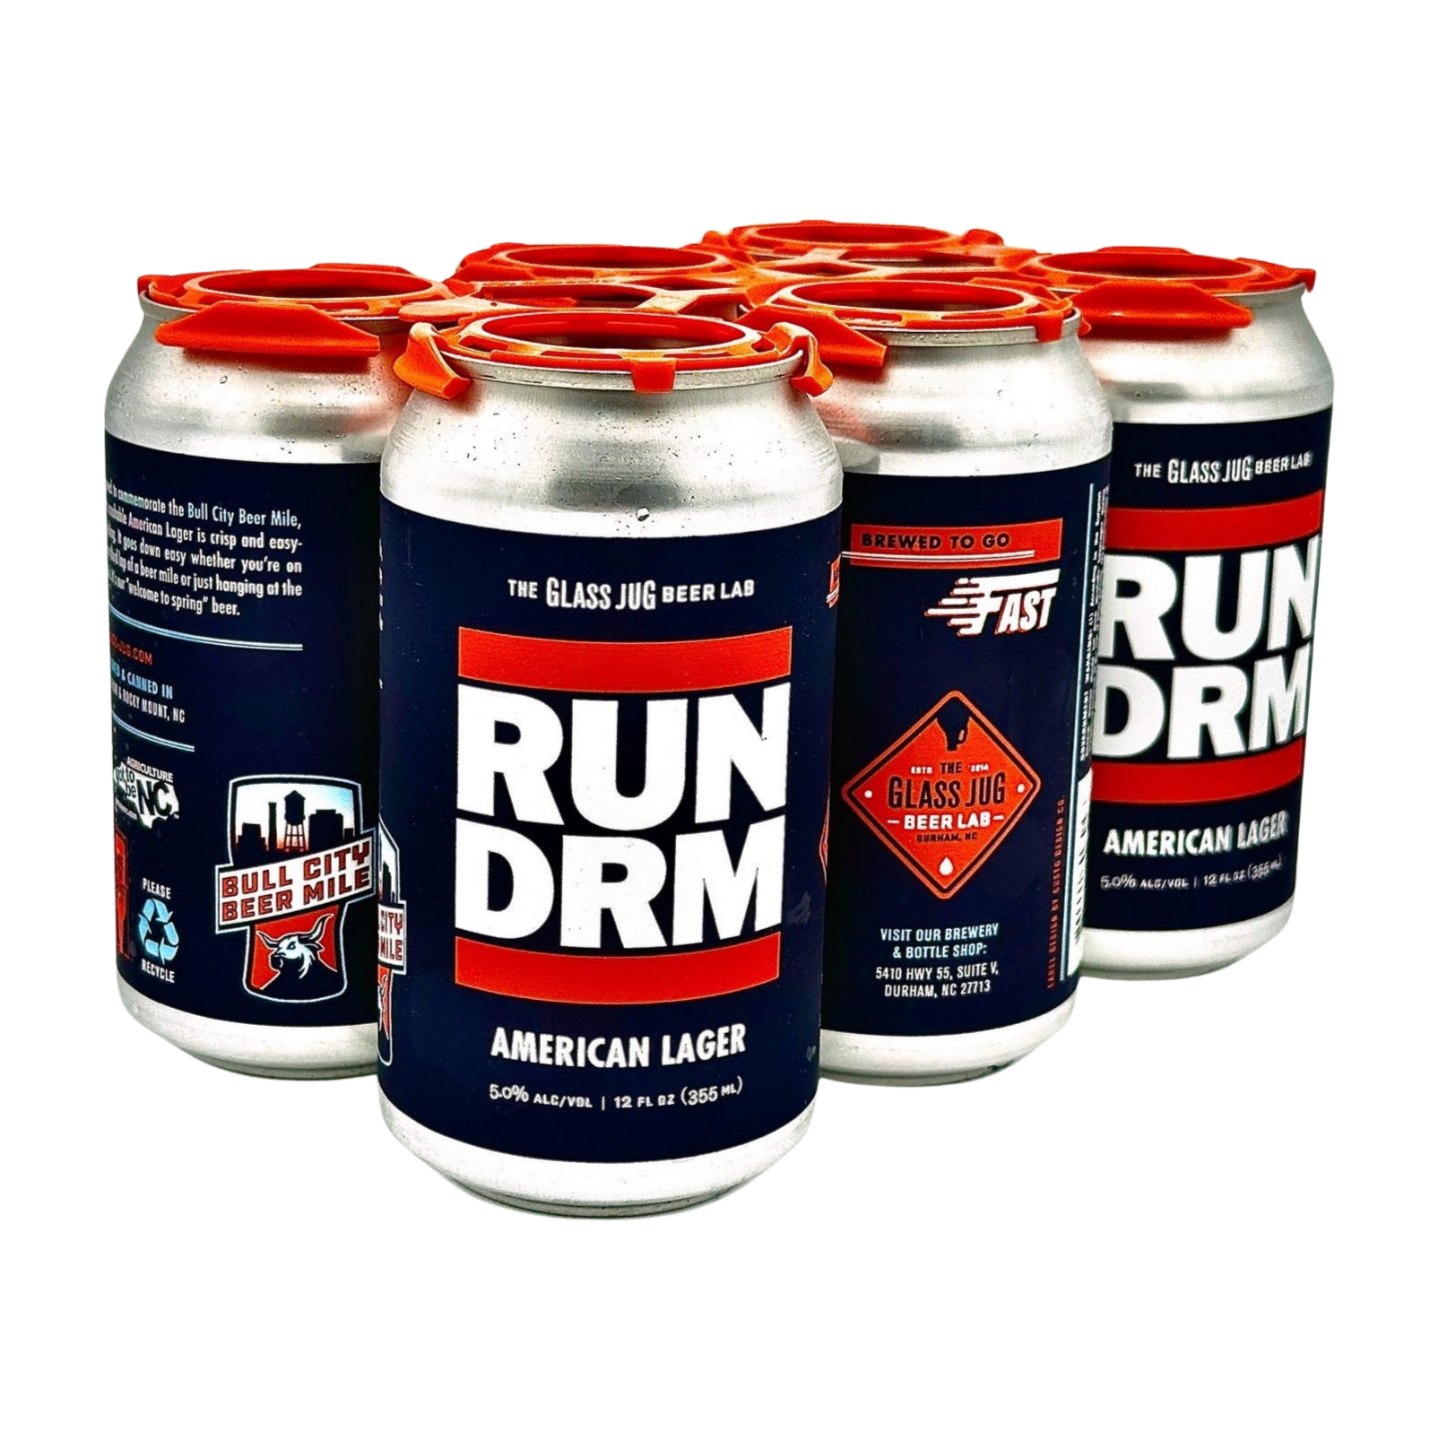 Run DRM, 12 oz cans, 6 pack